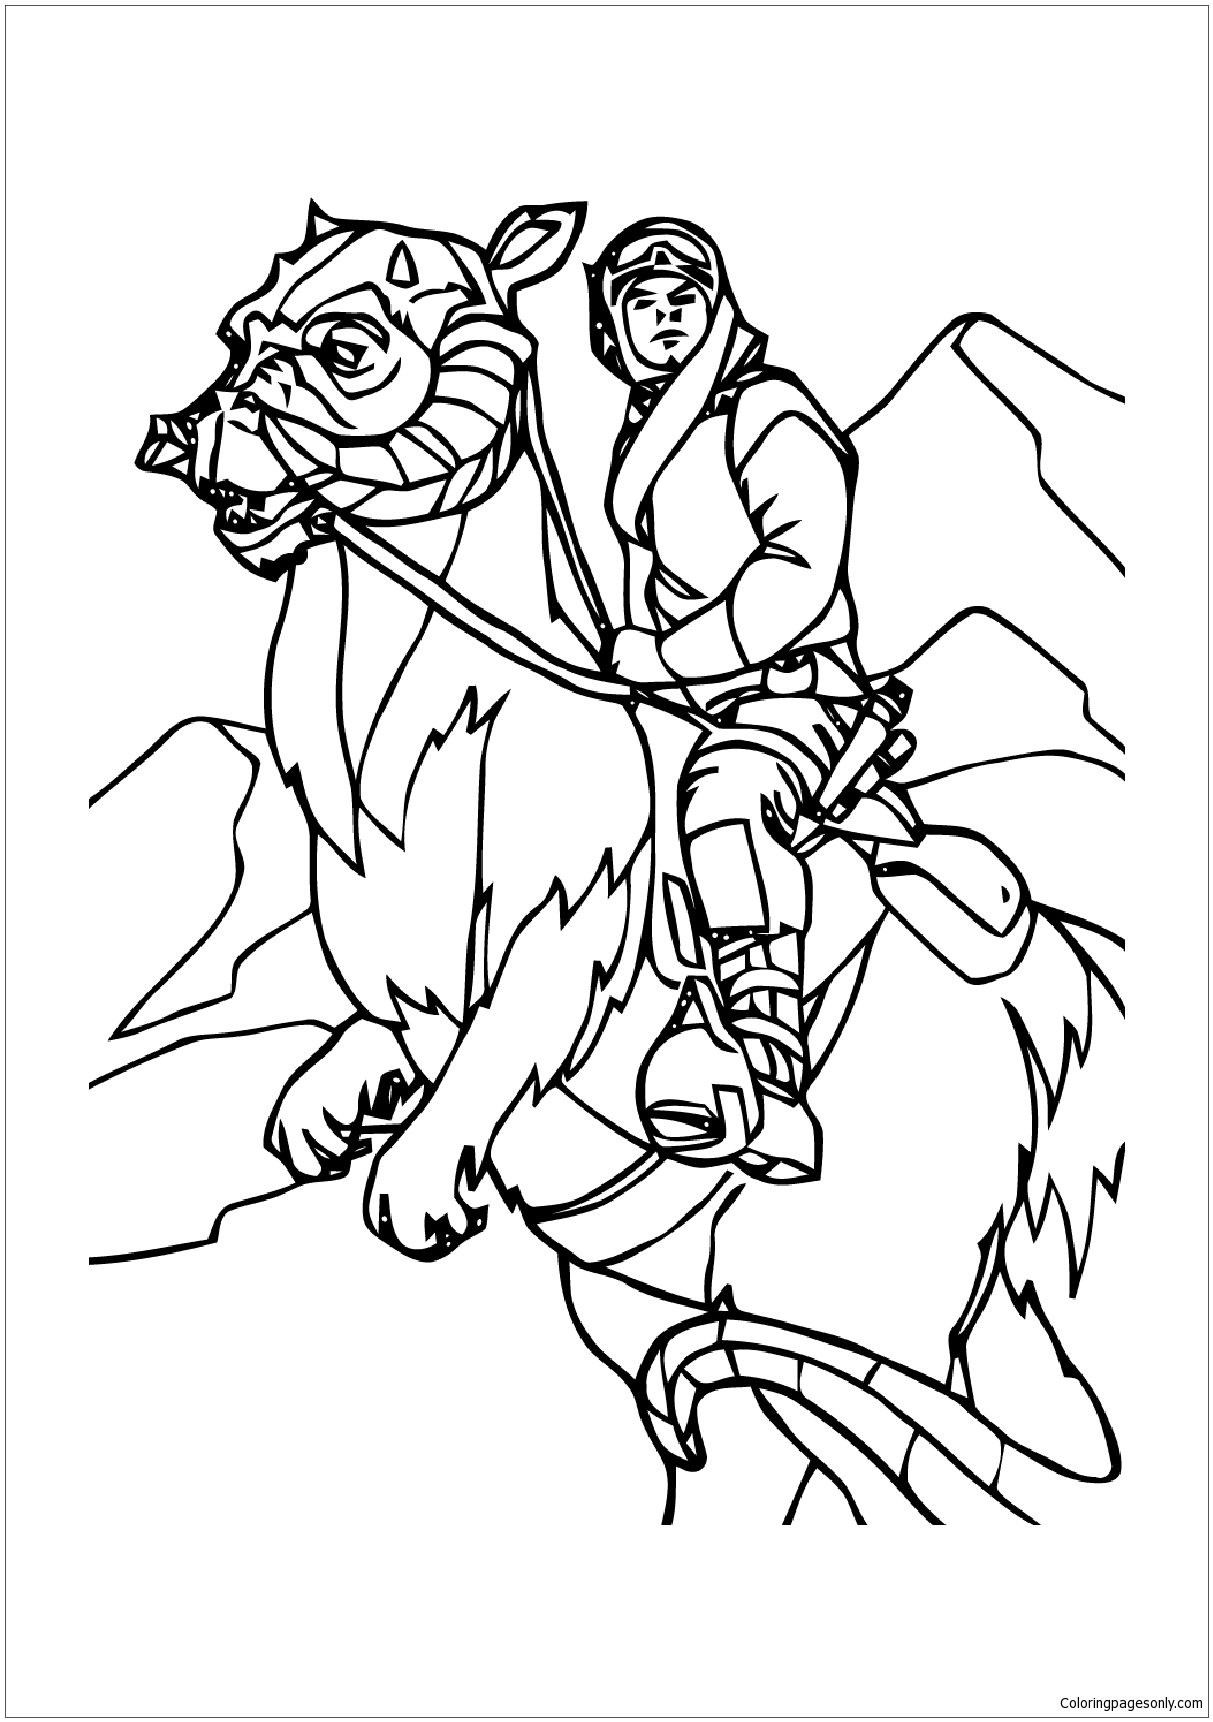 Star Wars 9 Coloring Pages